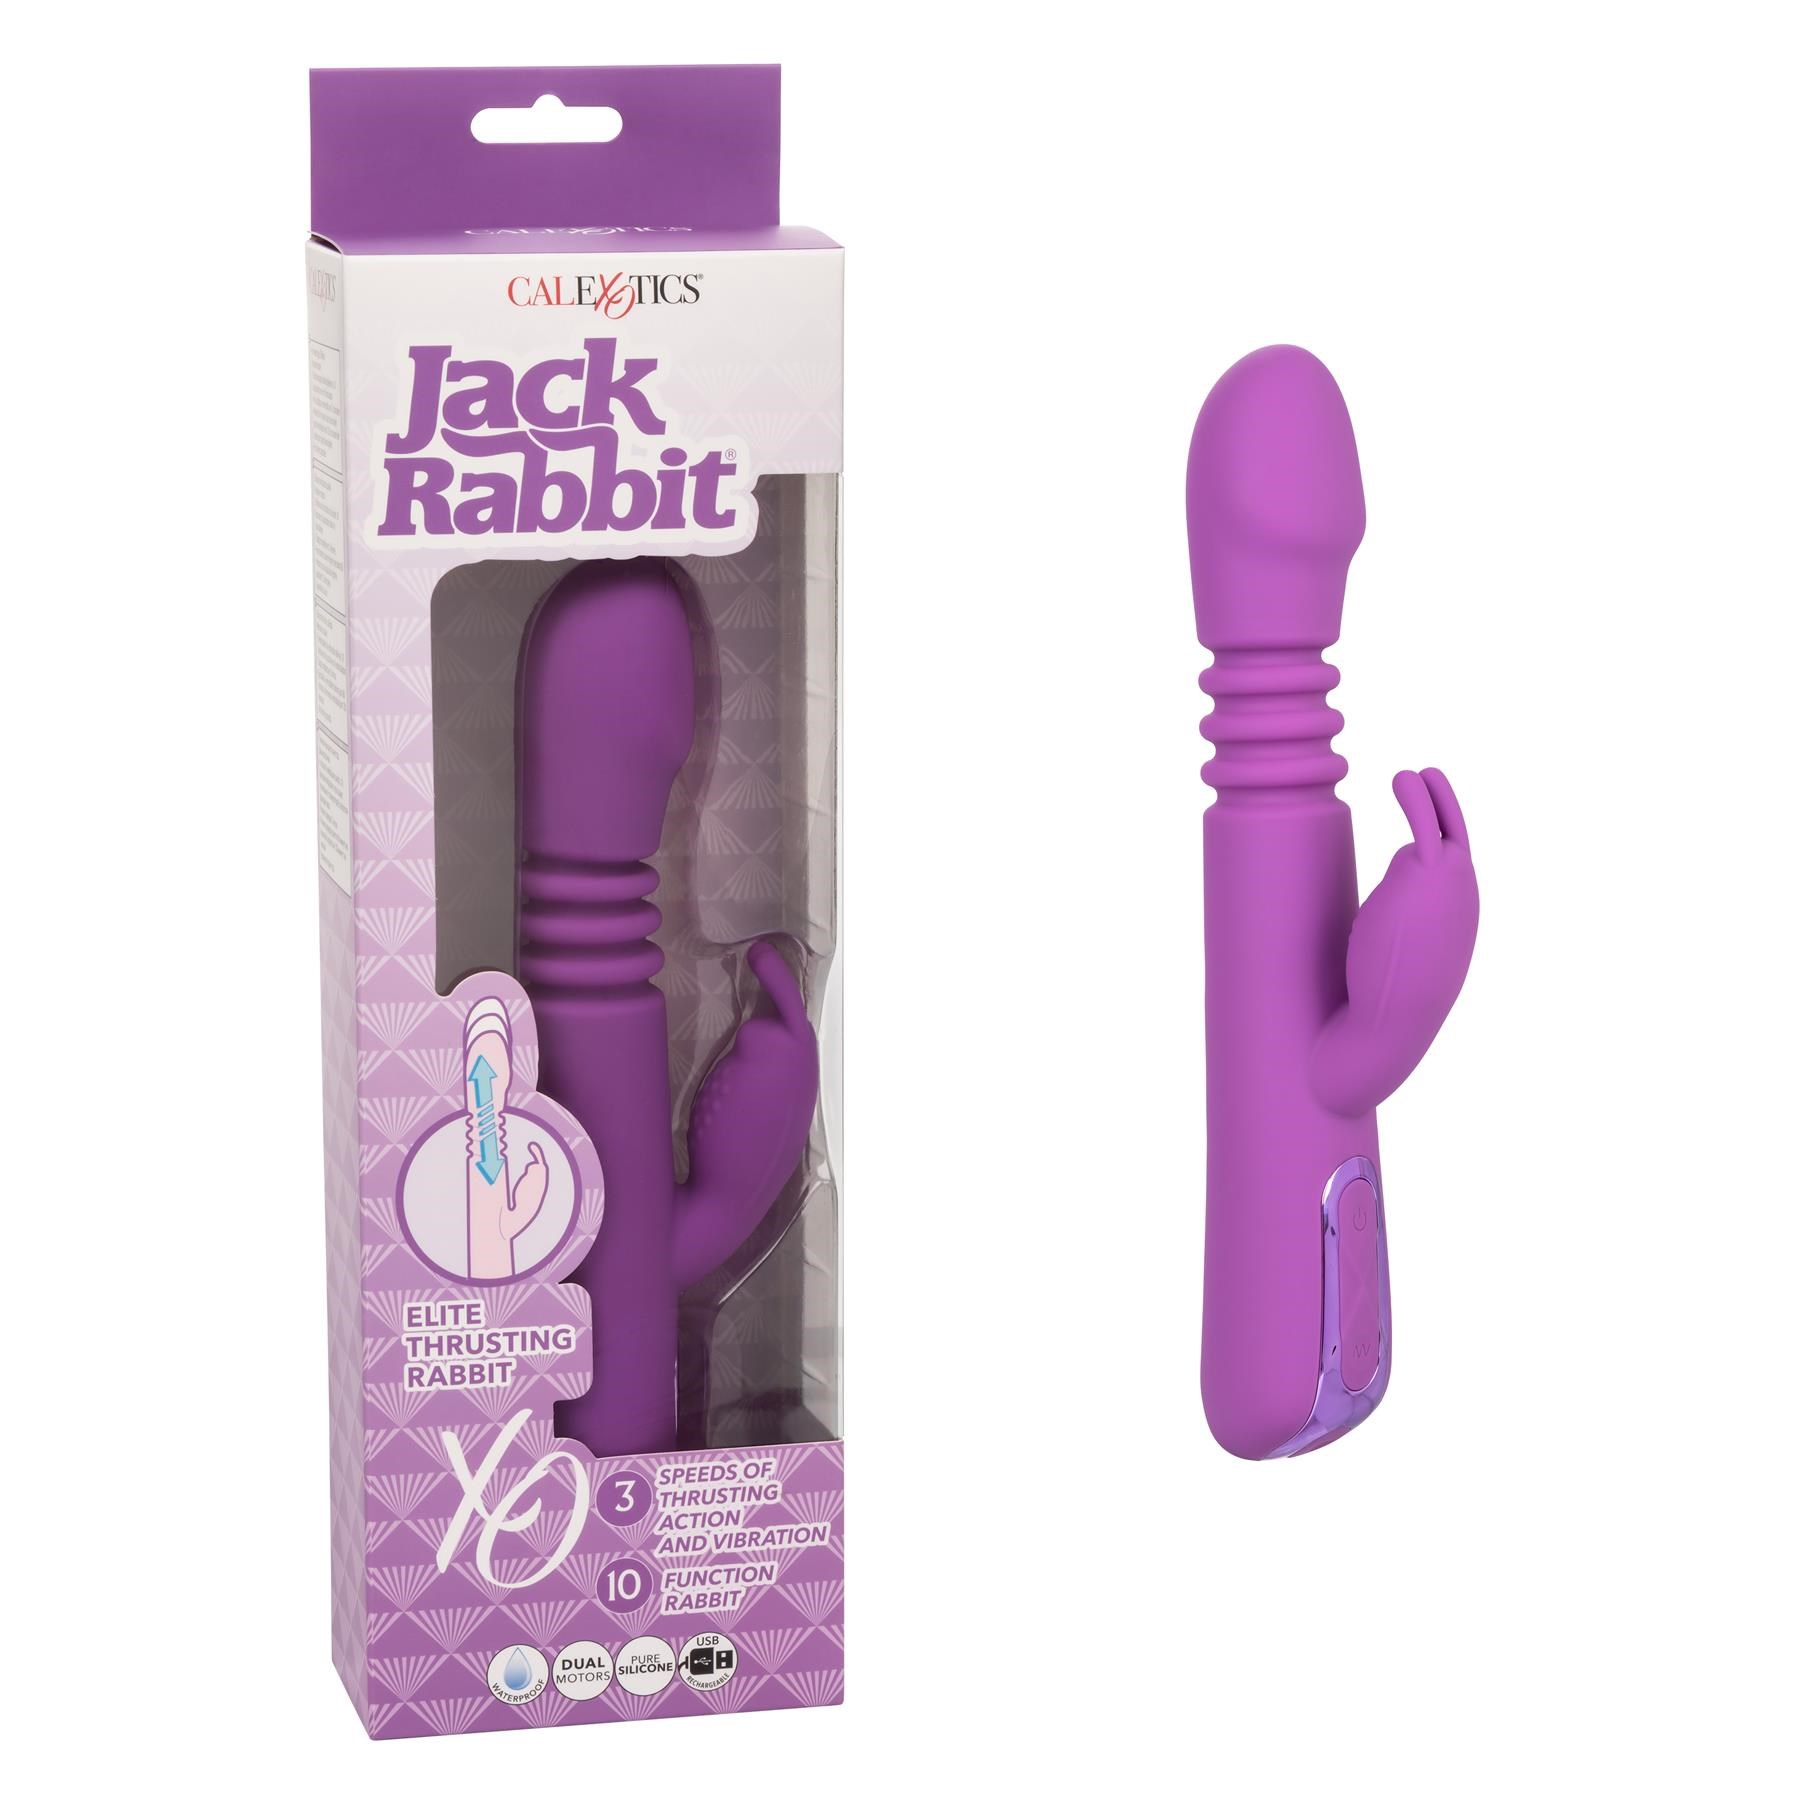 Jack Rabbit Elite Thrusting Rabbit- Product and Packaging